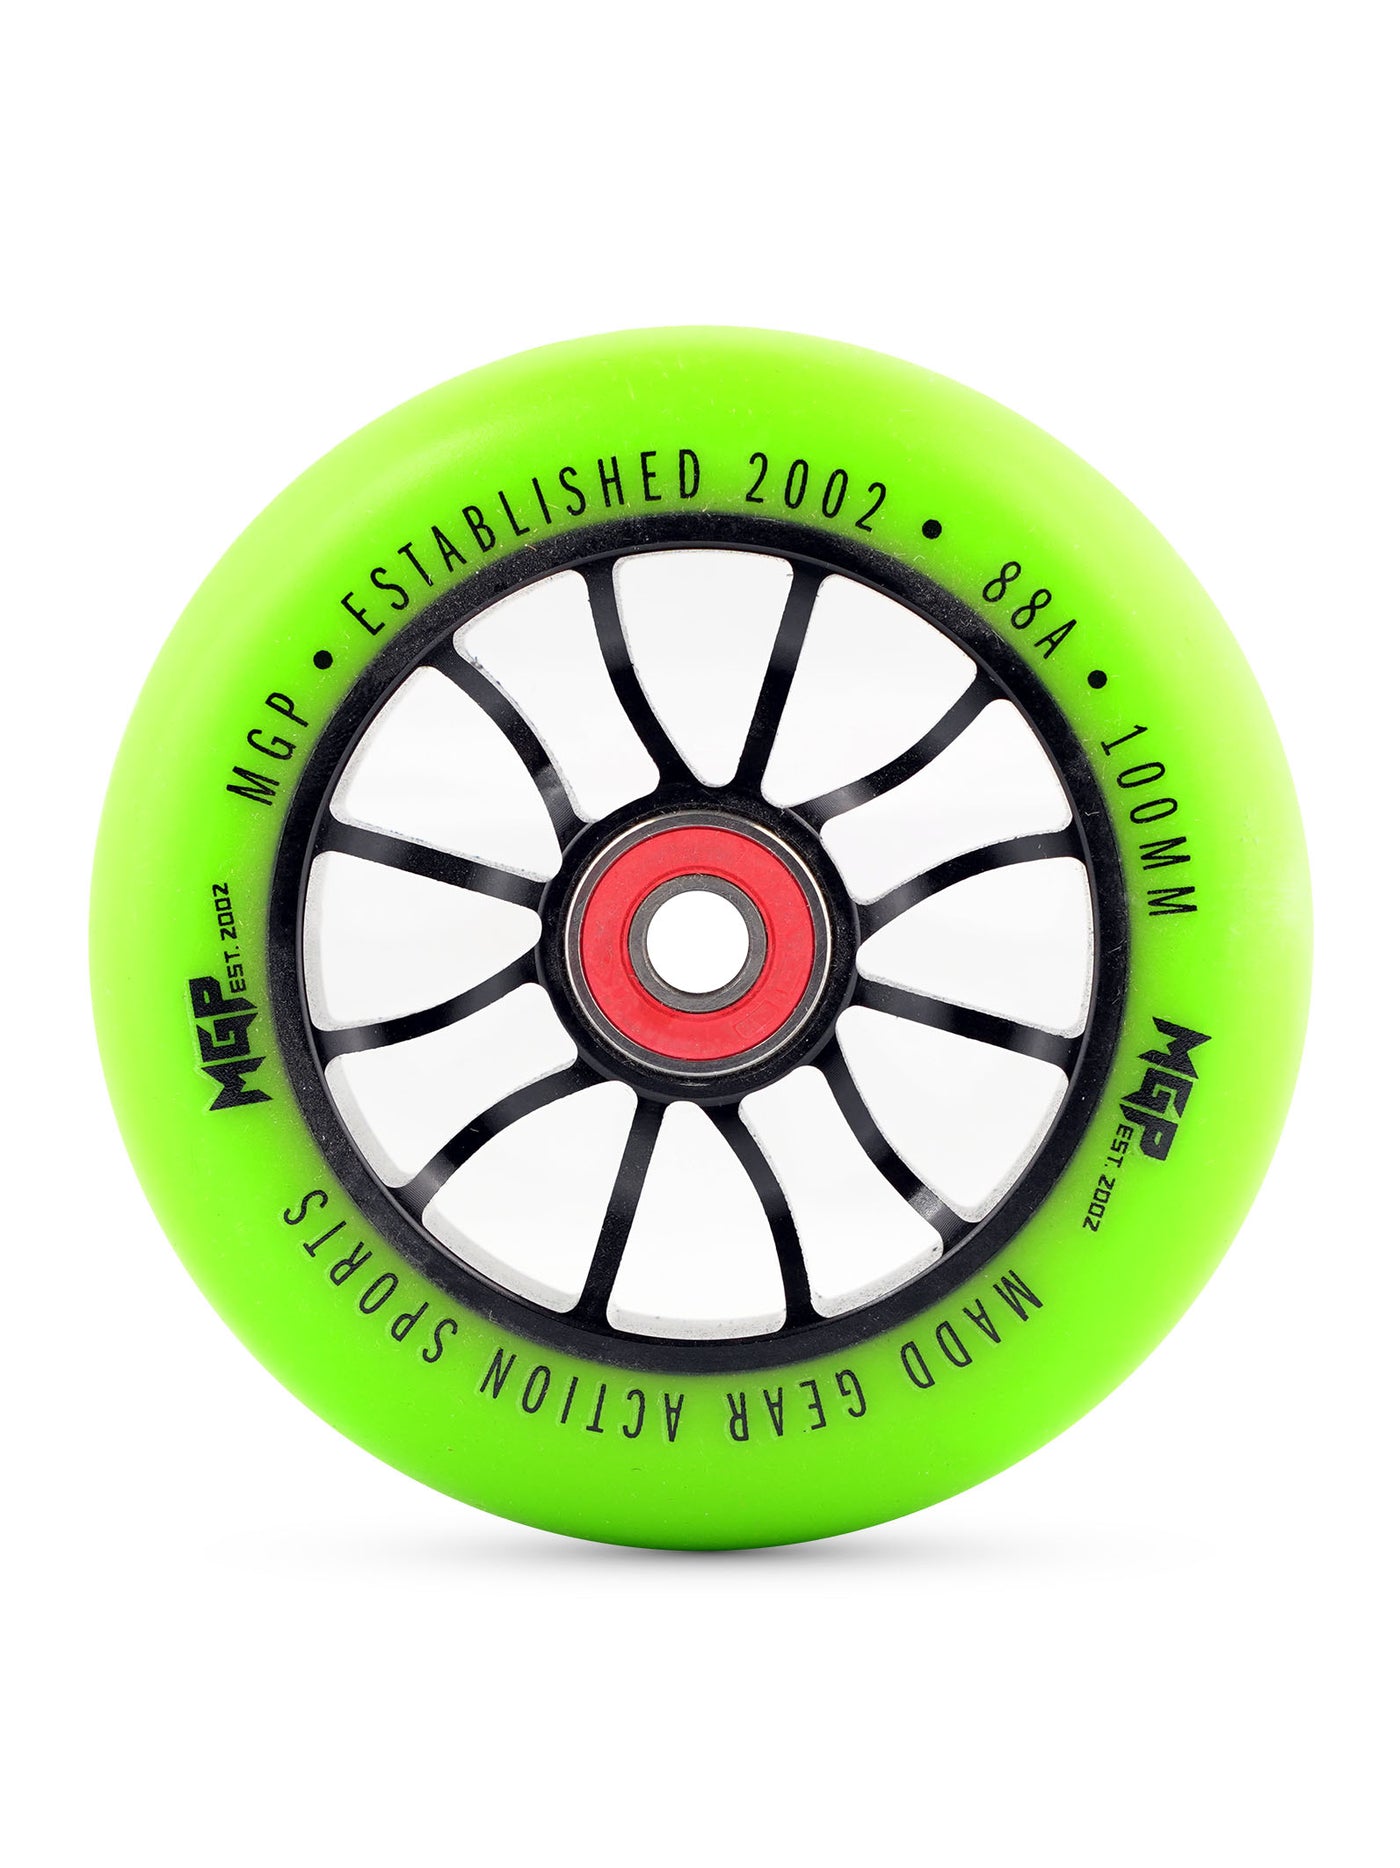 mfx madd gear mgp pro scooter wheel stunt trick alloy metal core replacement abec-9 green